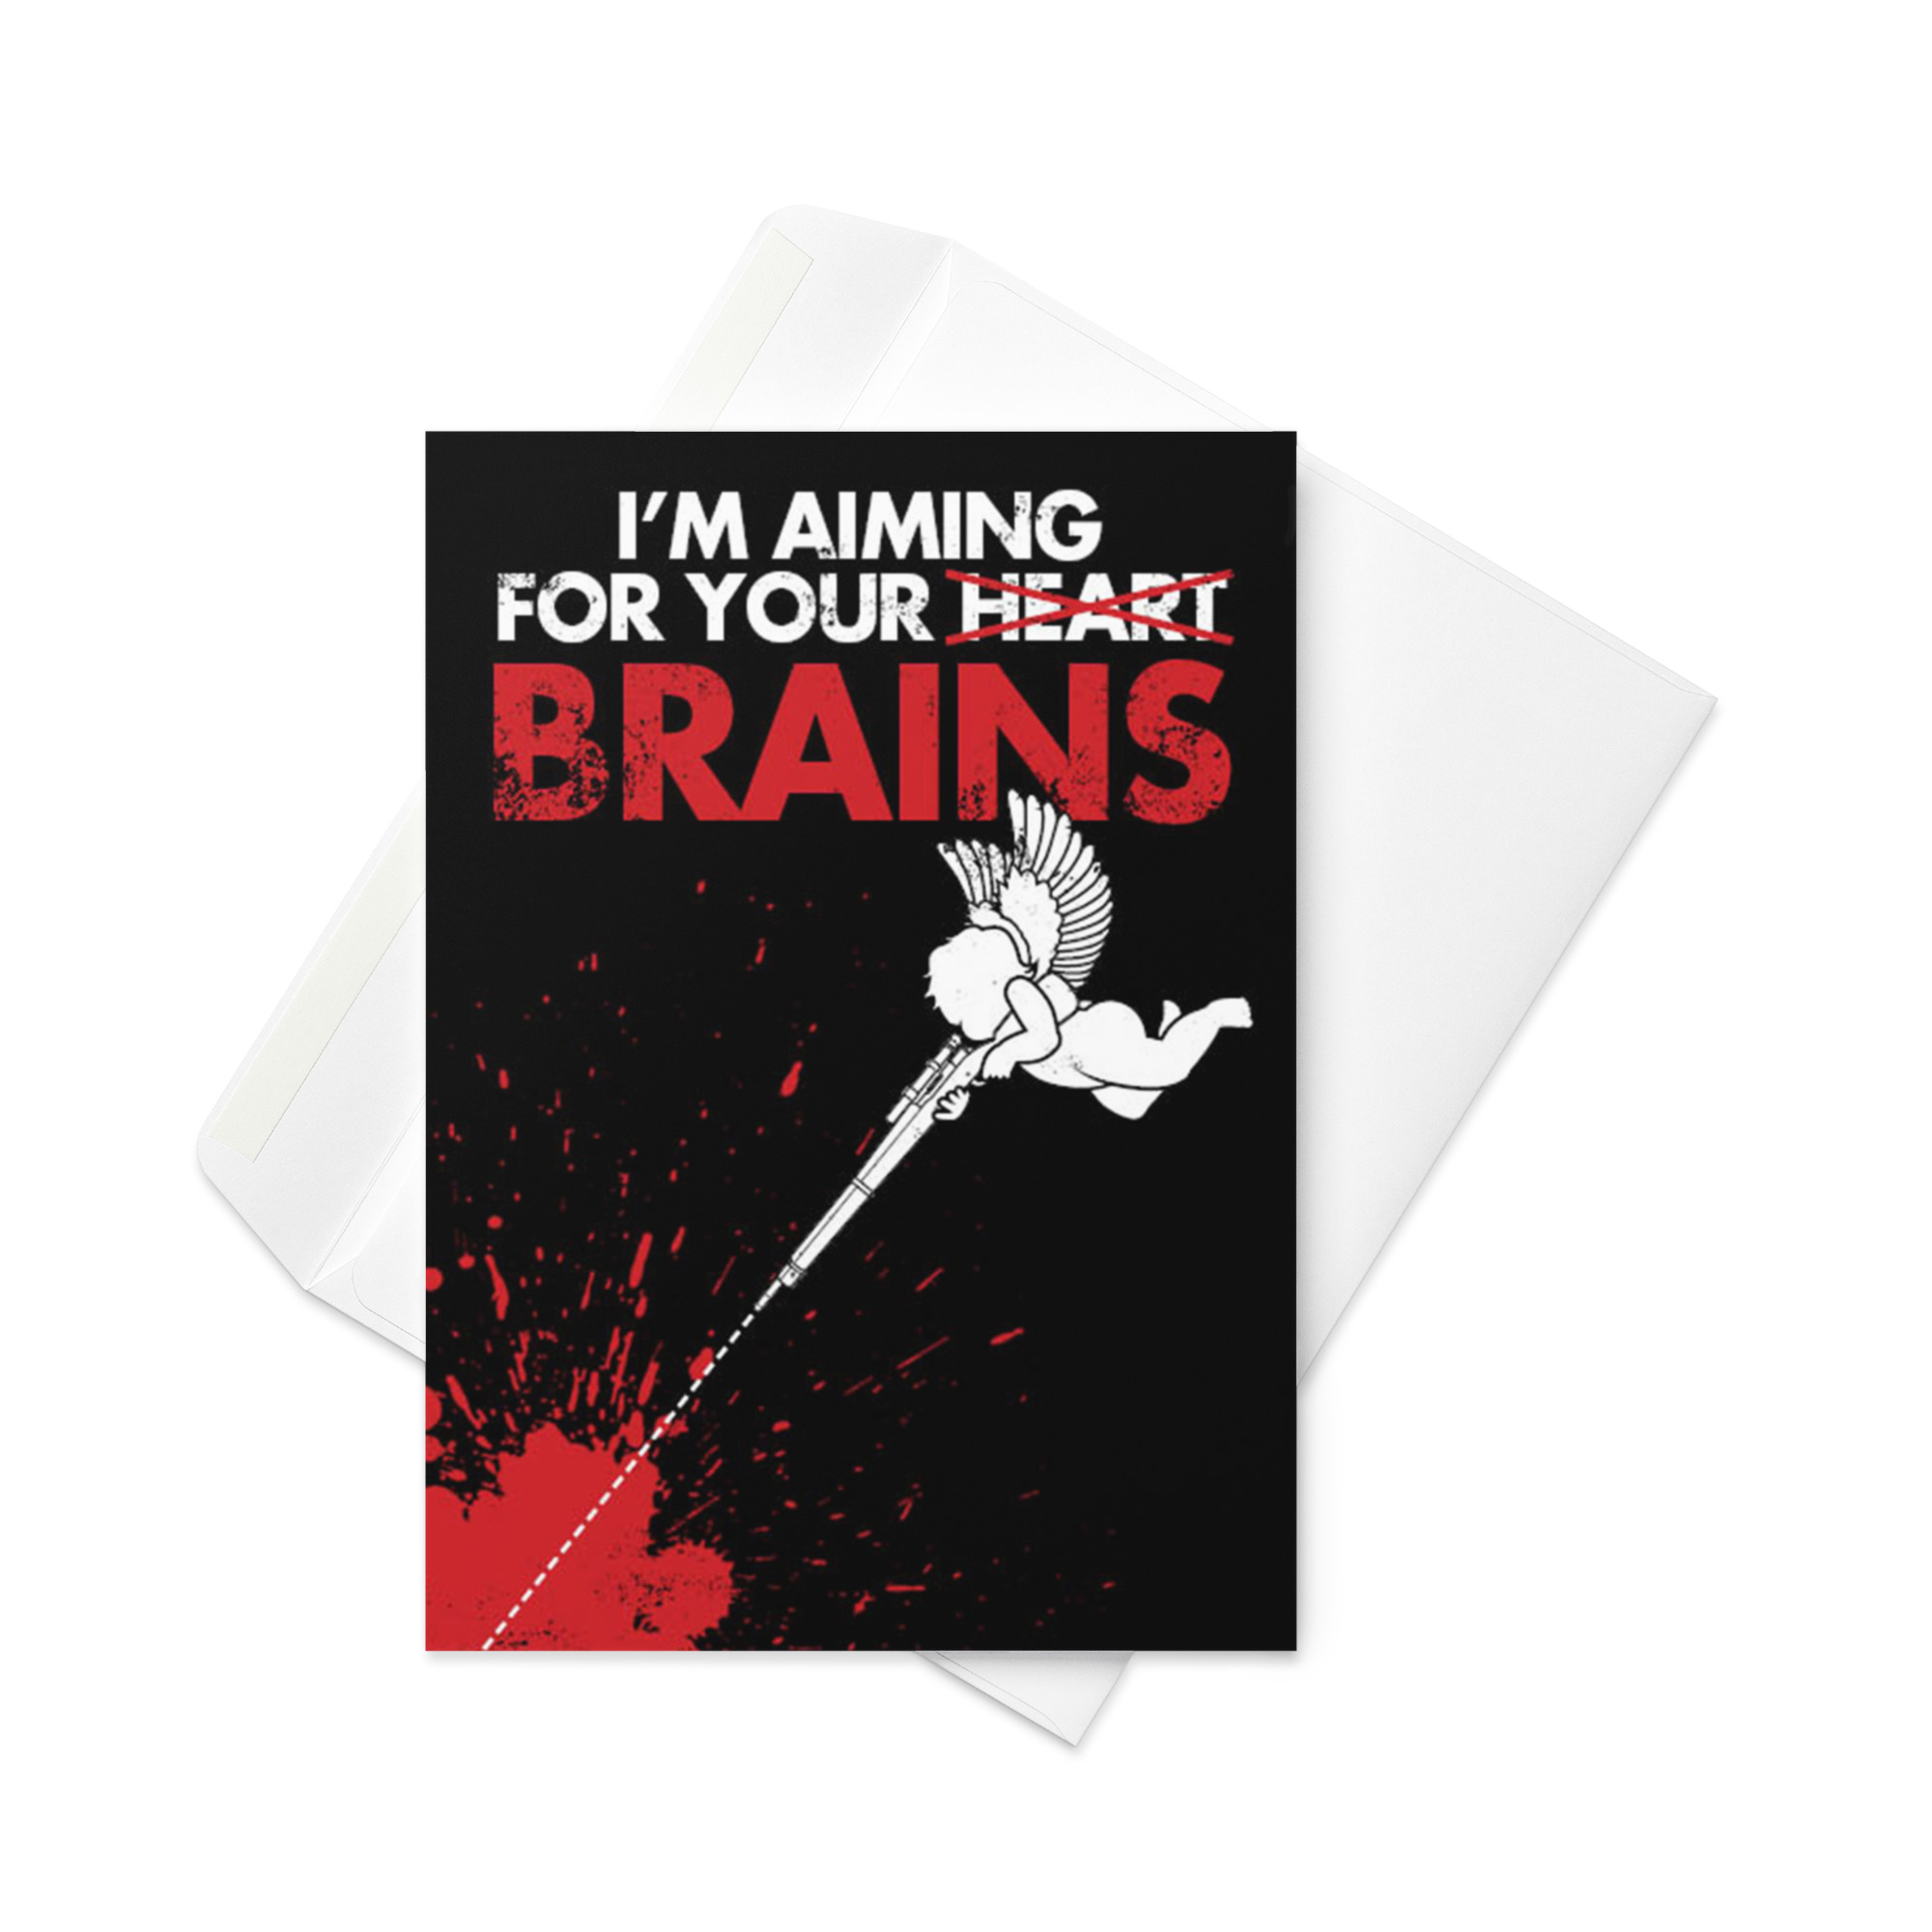 5 inch by 7 inch greetings card with a cherub firing a rifle with text saying 